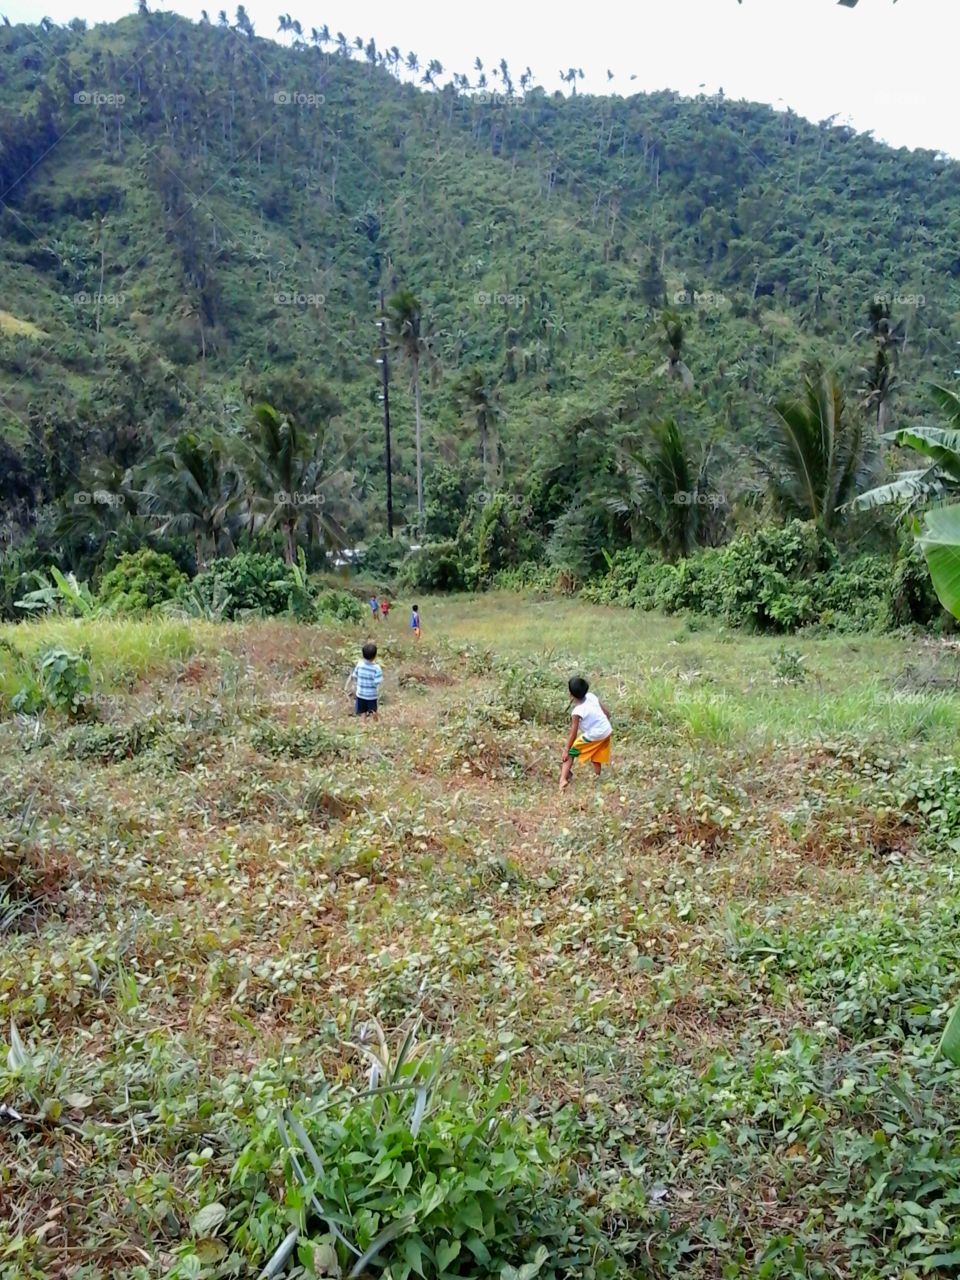 kids playing on the field